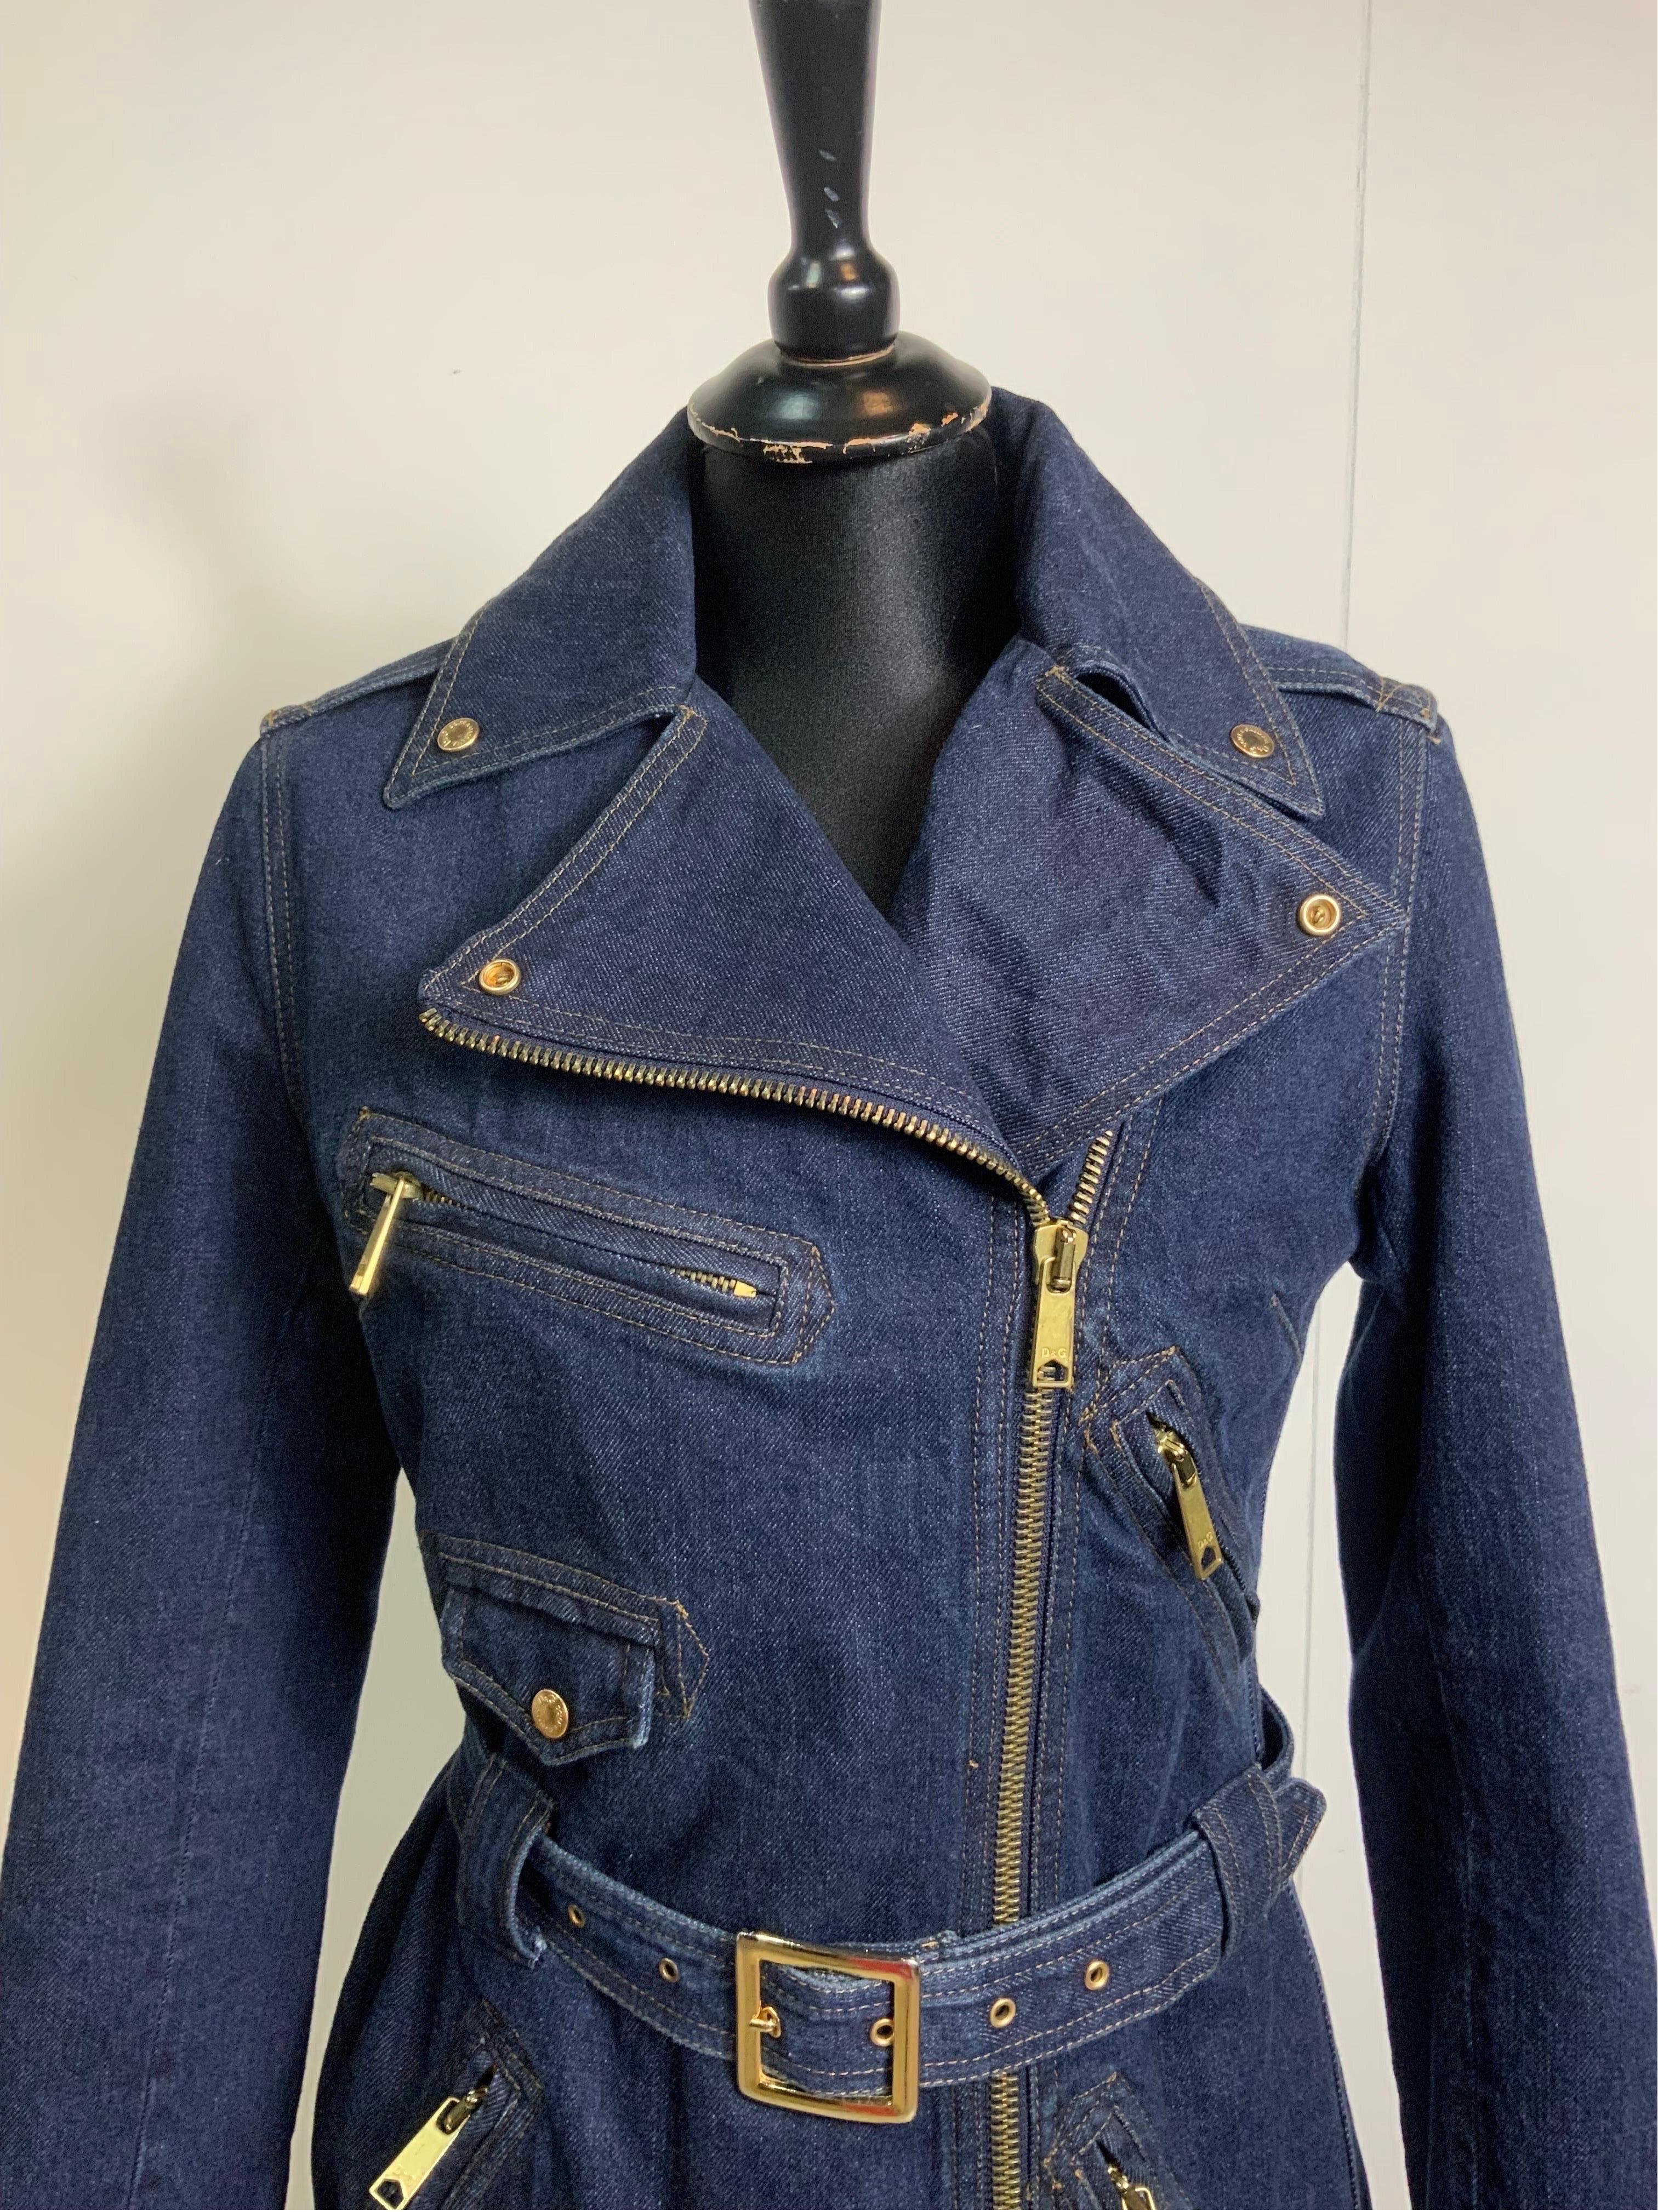 D&G denim trench coat. Golden and slightly oxidized zip and hardware.
Made of cotton. Lined.
Size XS.
Shoulders 38 cm
Bust 42 cm
Length 106 cm
Sleeve 52 cm
Good general condition, shows signs of normal use. Vintage item.